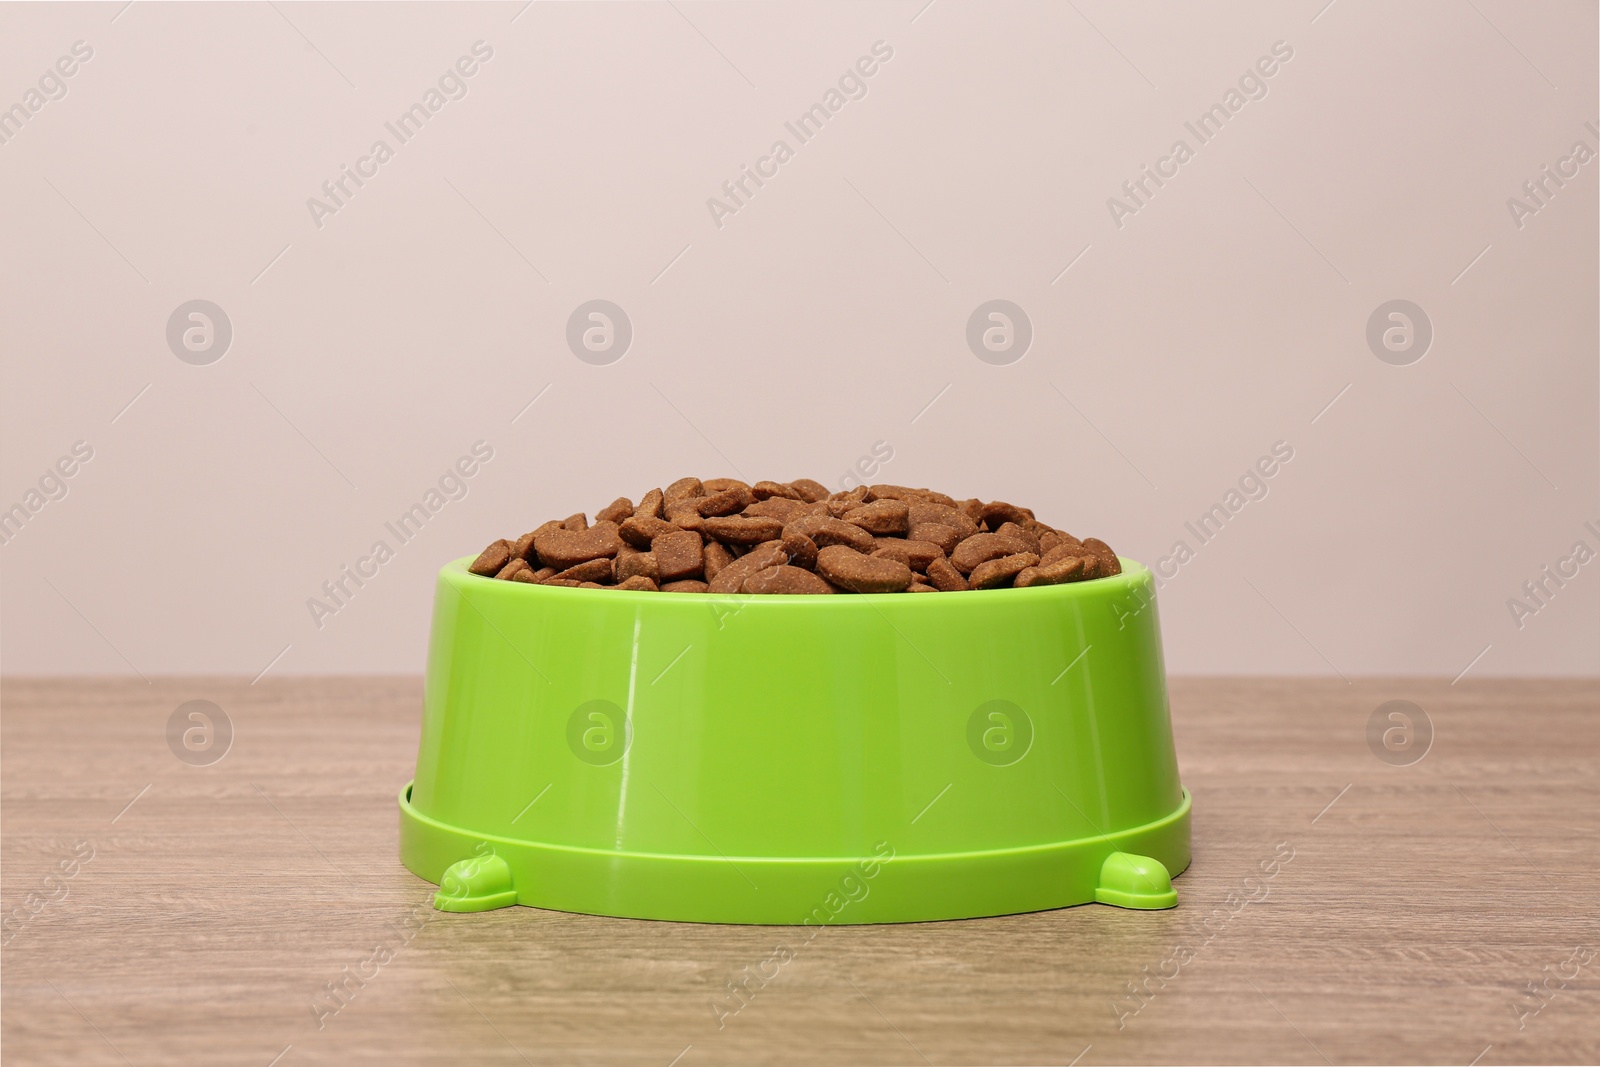 Photo of Dry food in green pet bowl on wooden surface